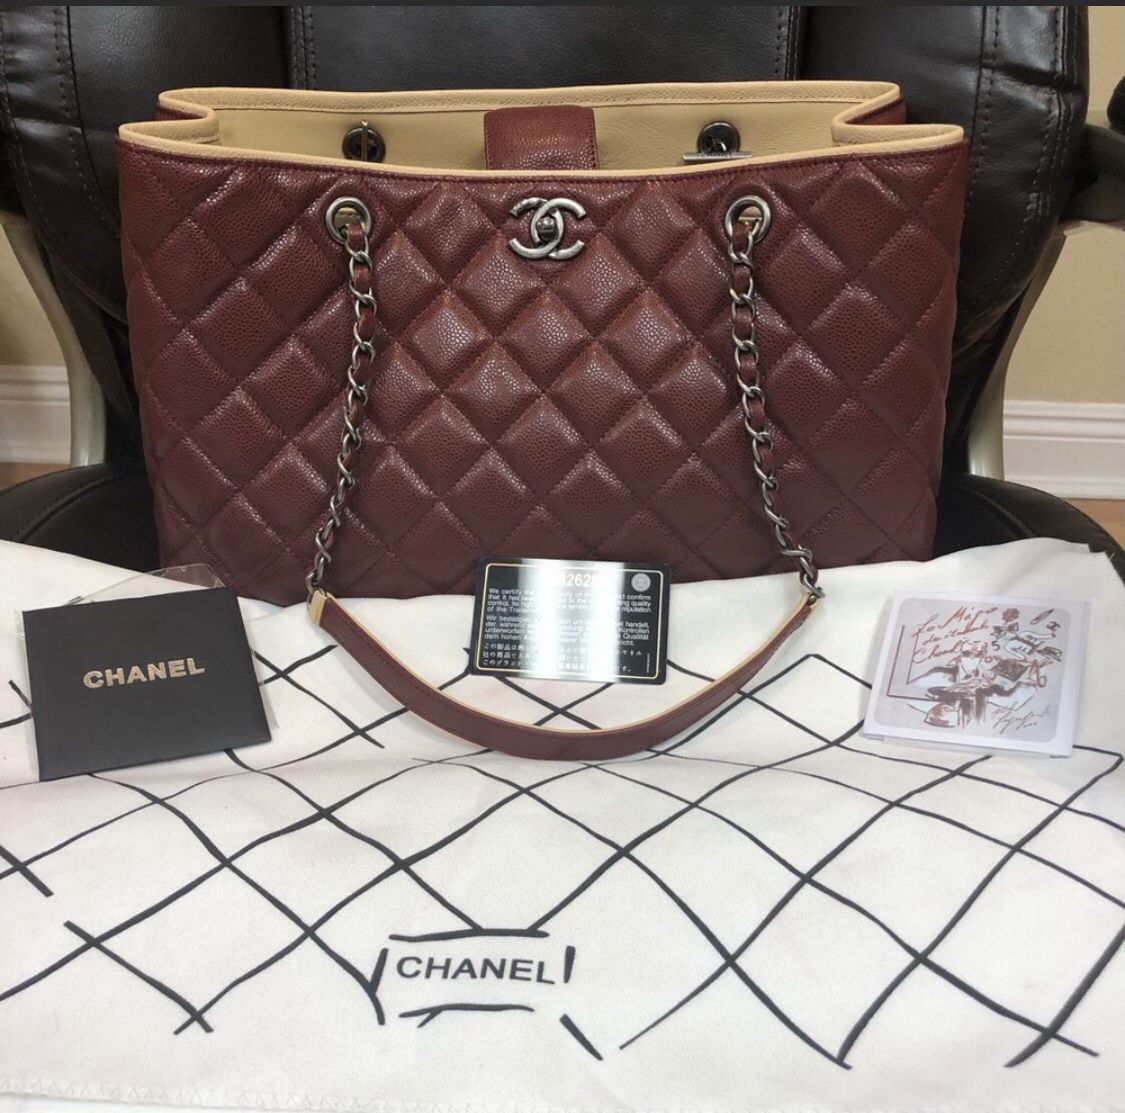 Chanel Shoulder Bag for Sale in Simi Valley, CA - OfferUp